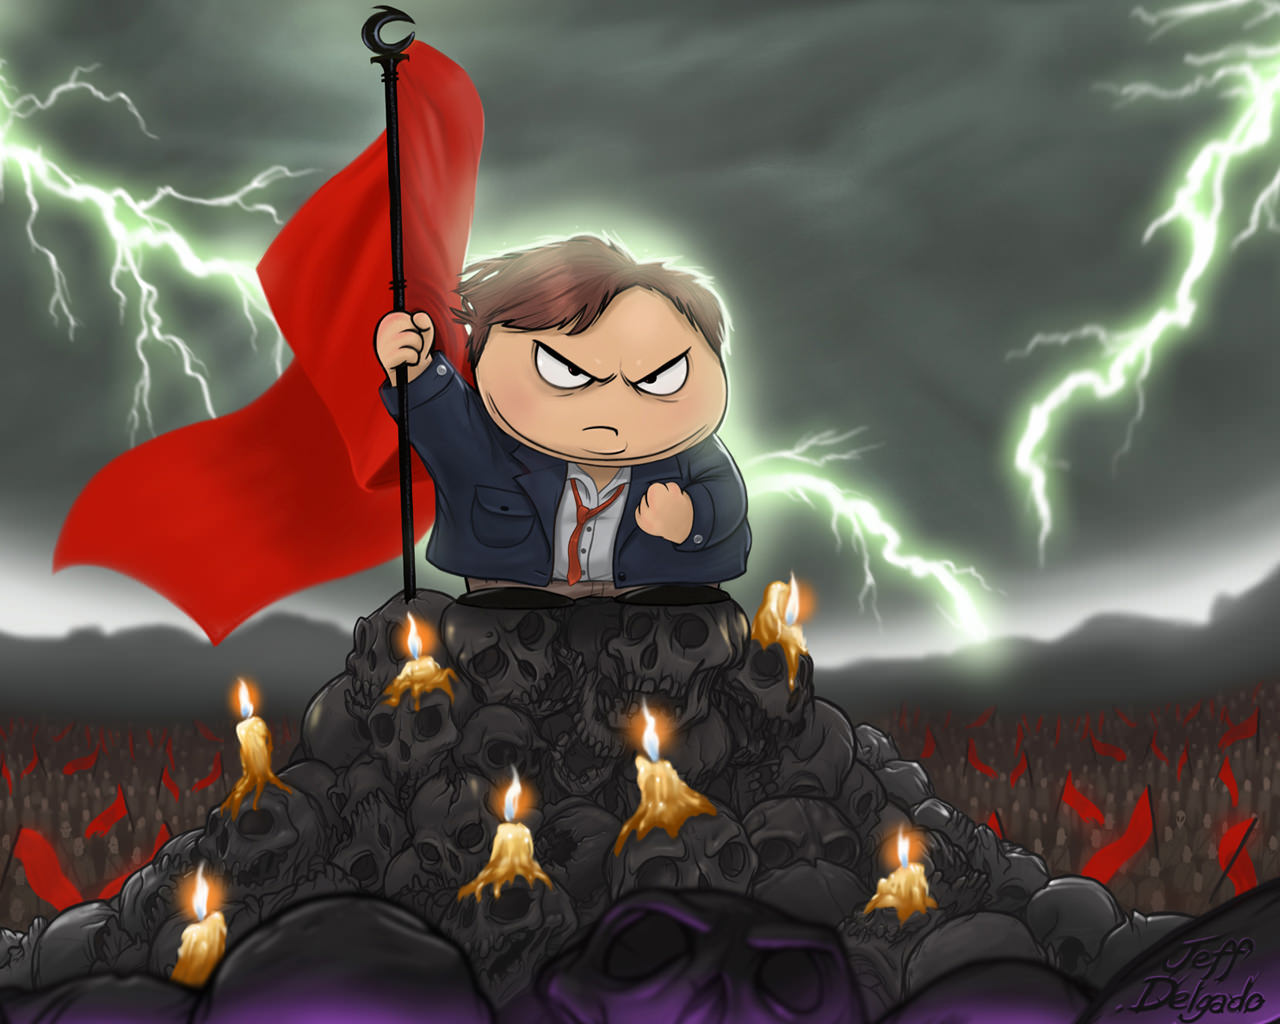 South Park Wallpapers HD candles angry